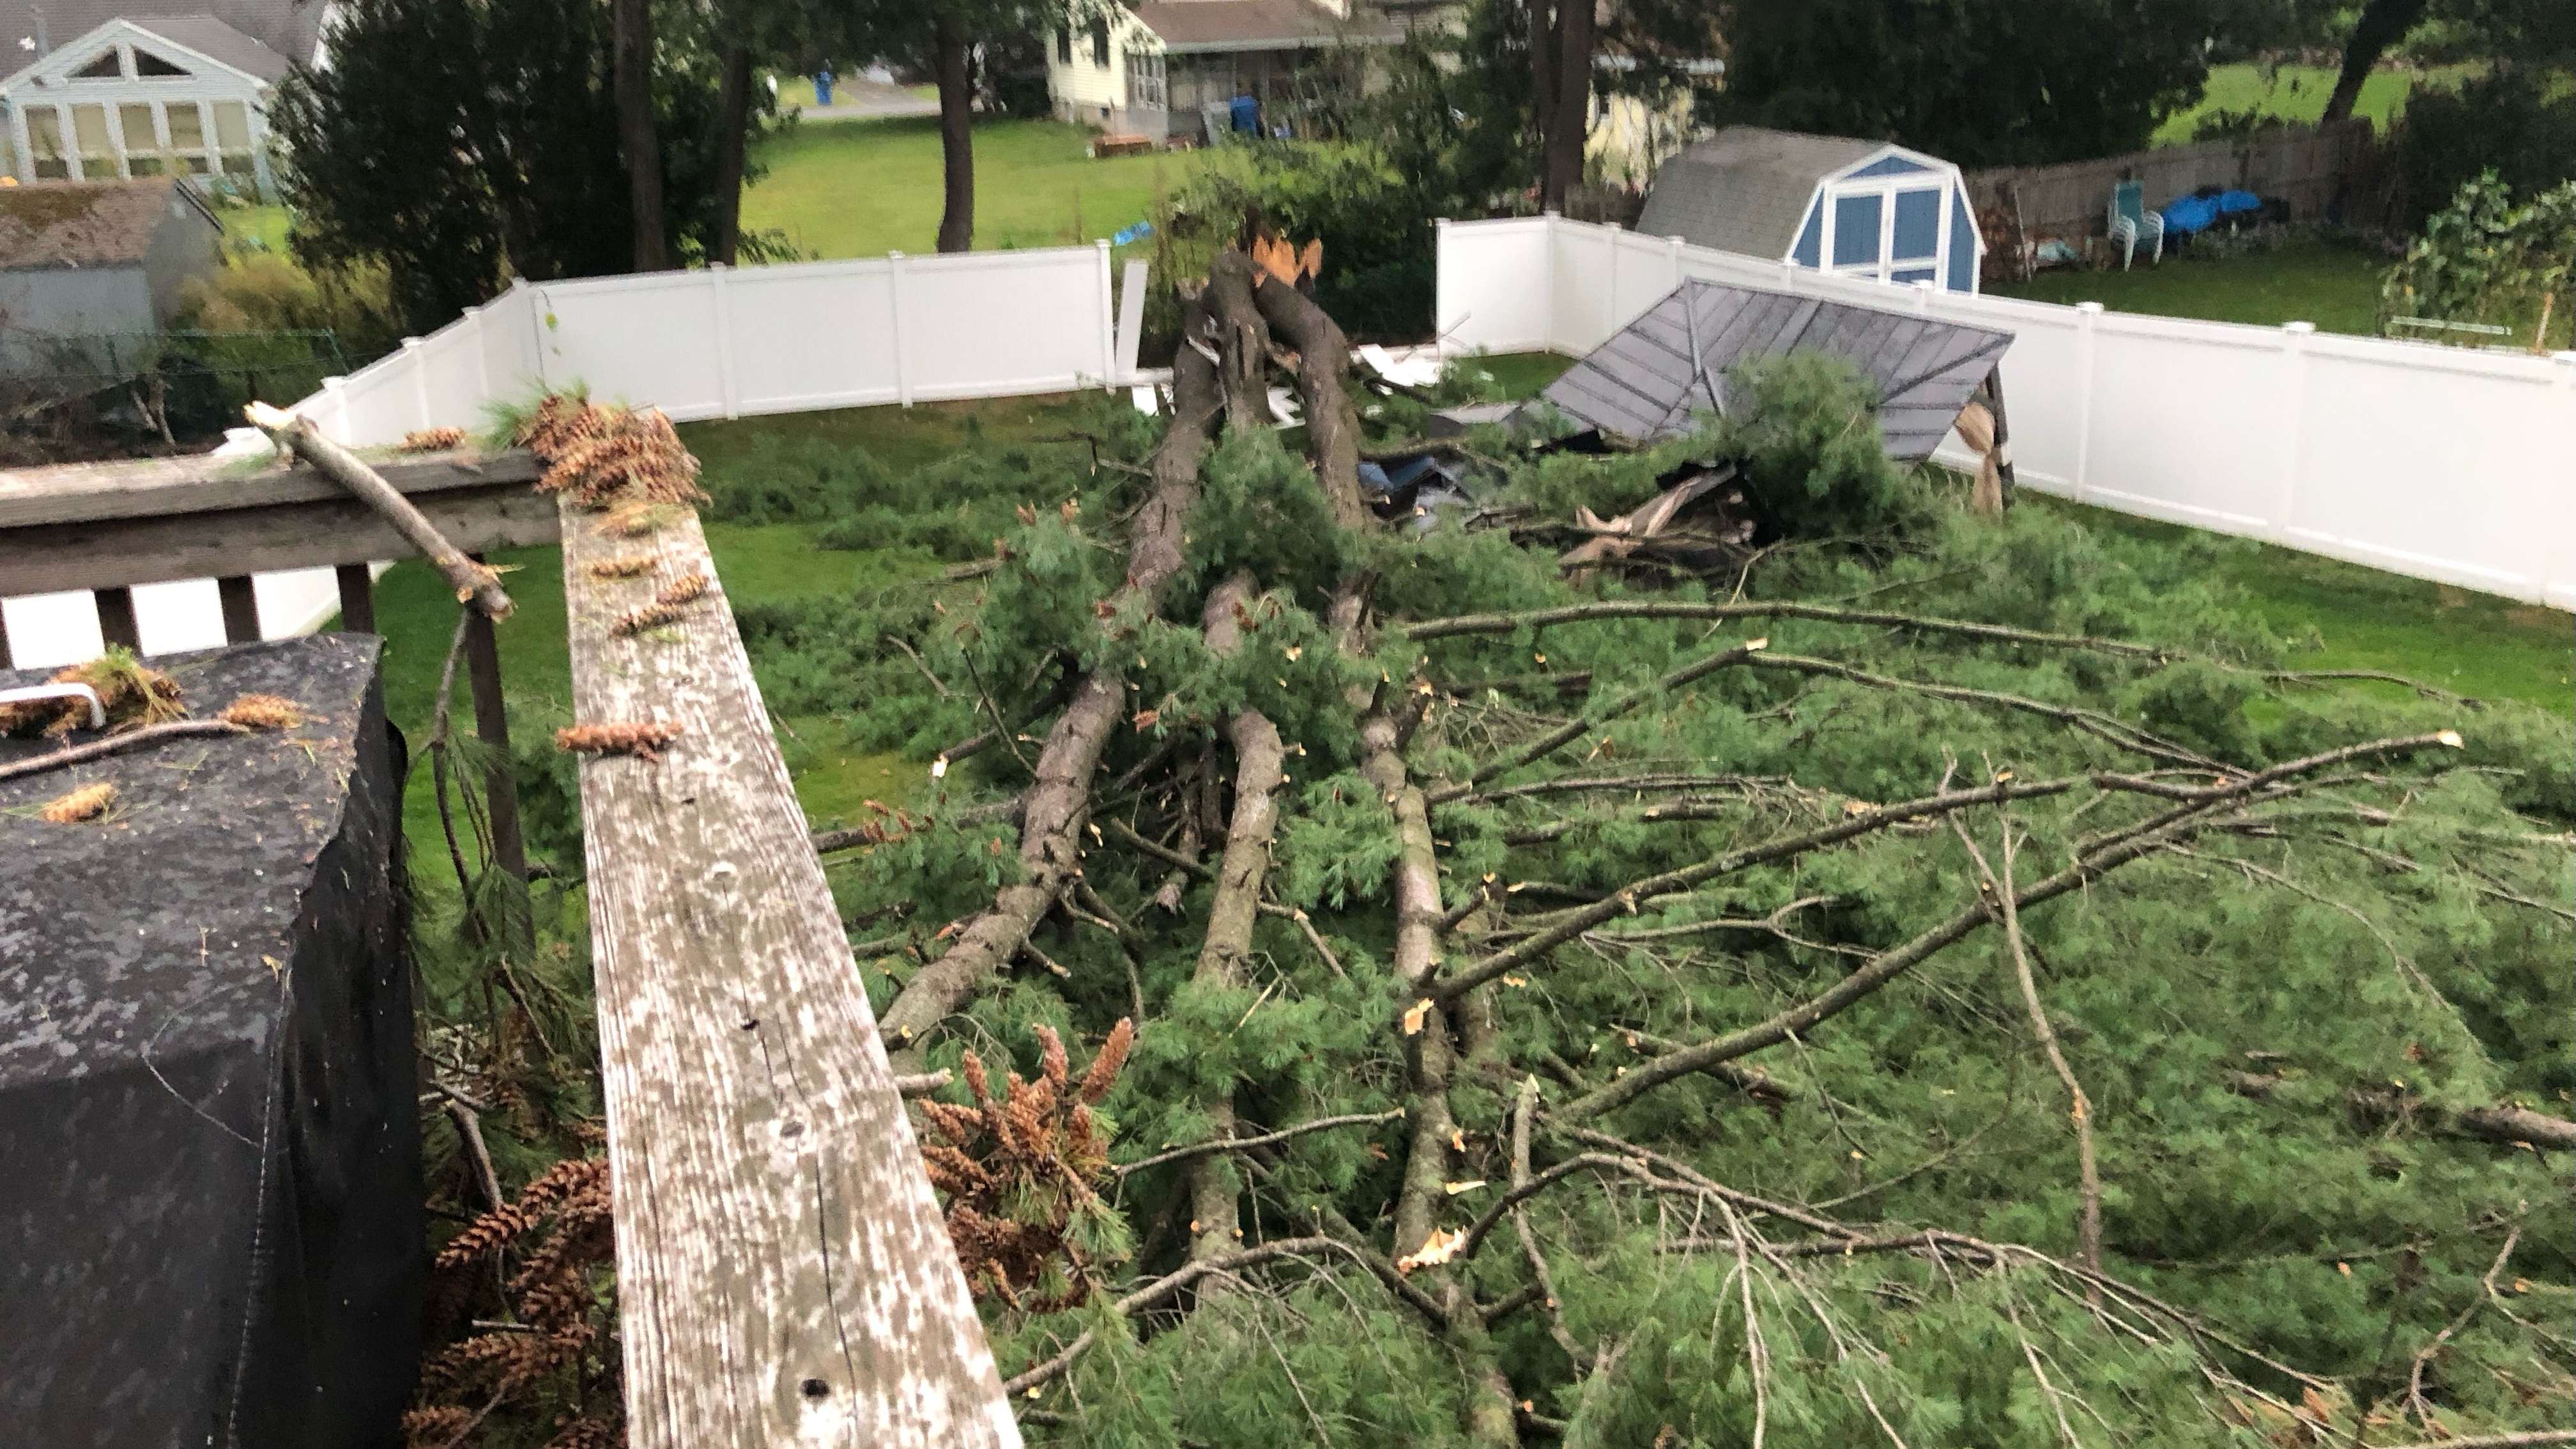 Storm damage seen across Connecticut on Friday